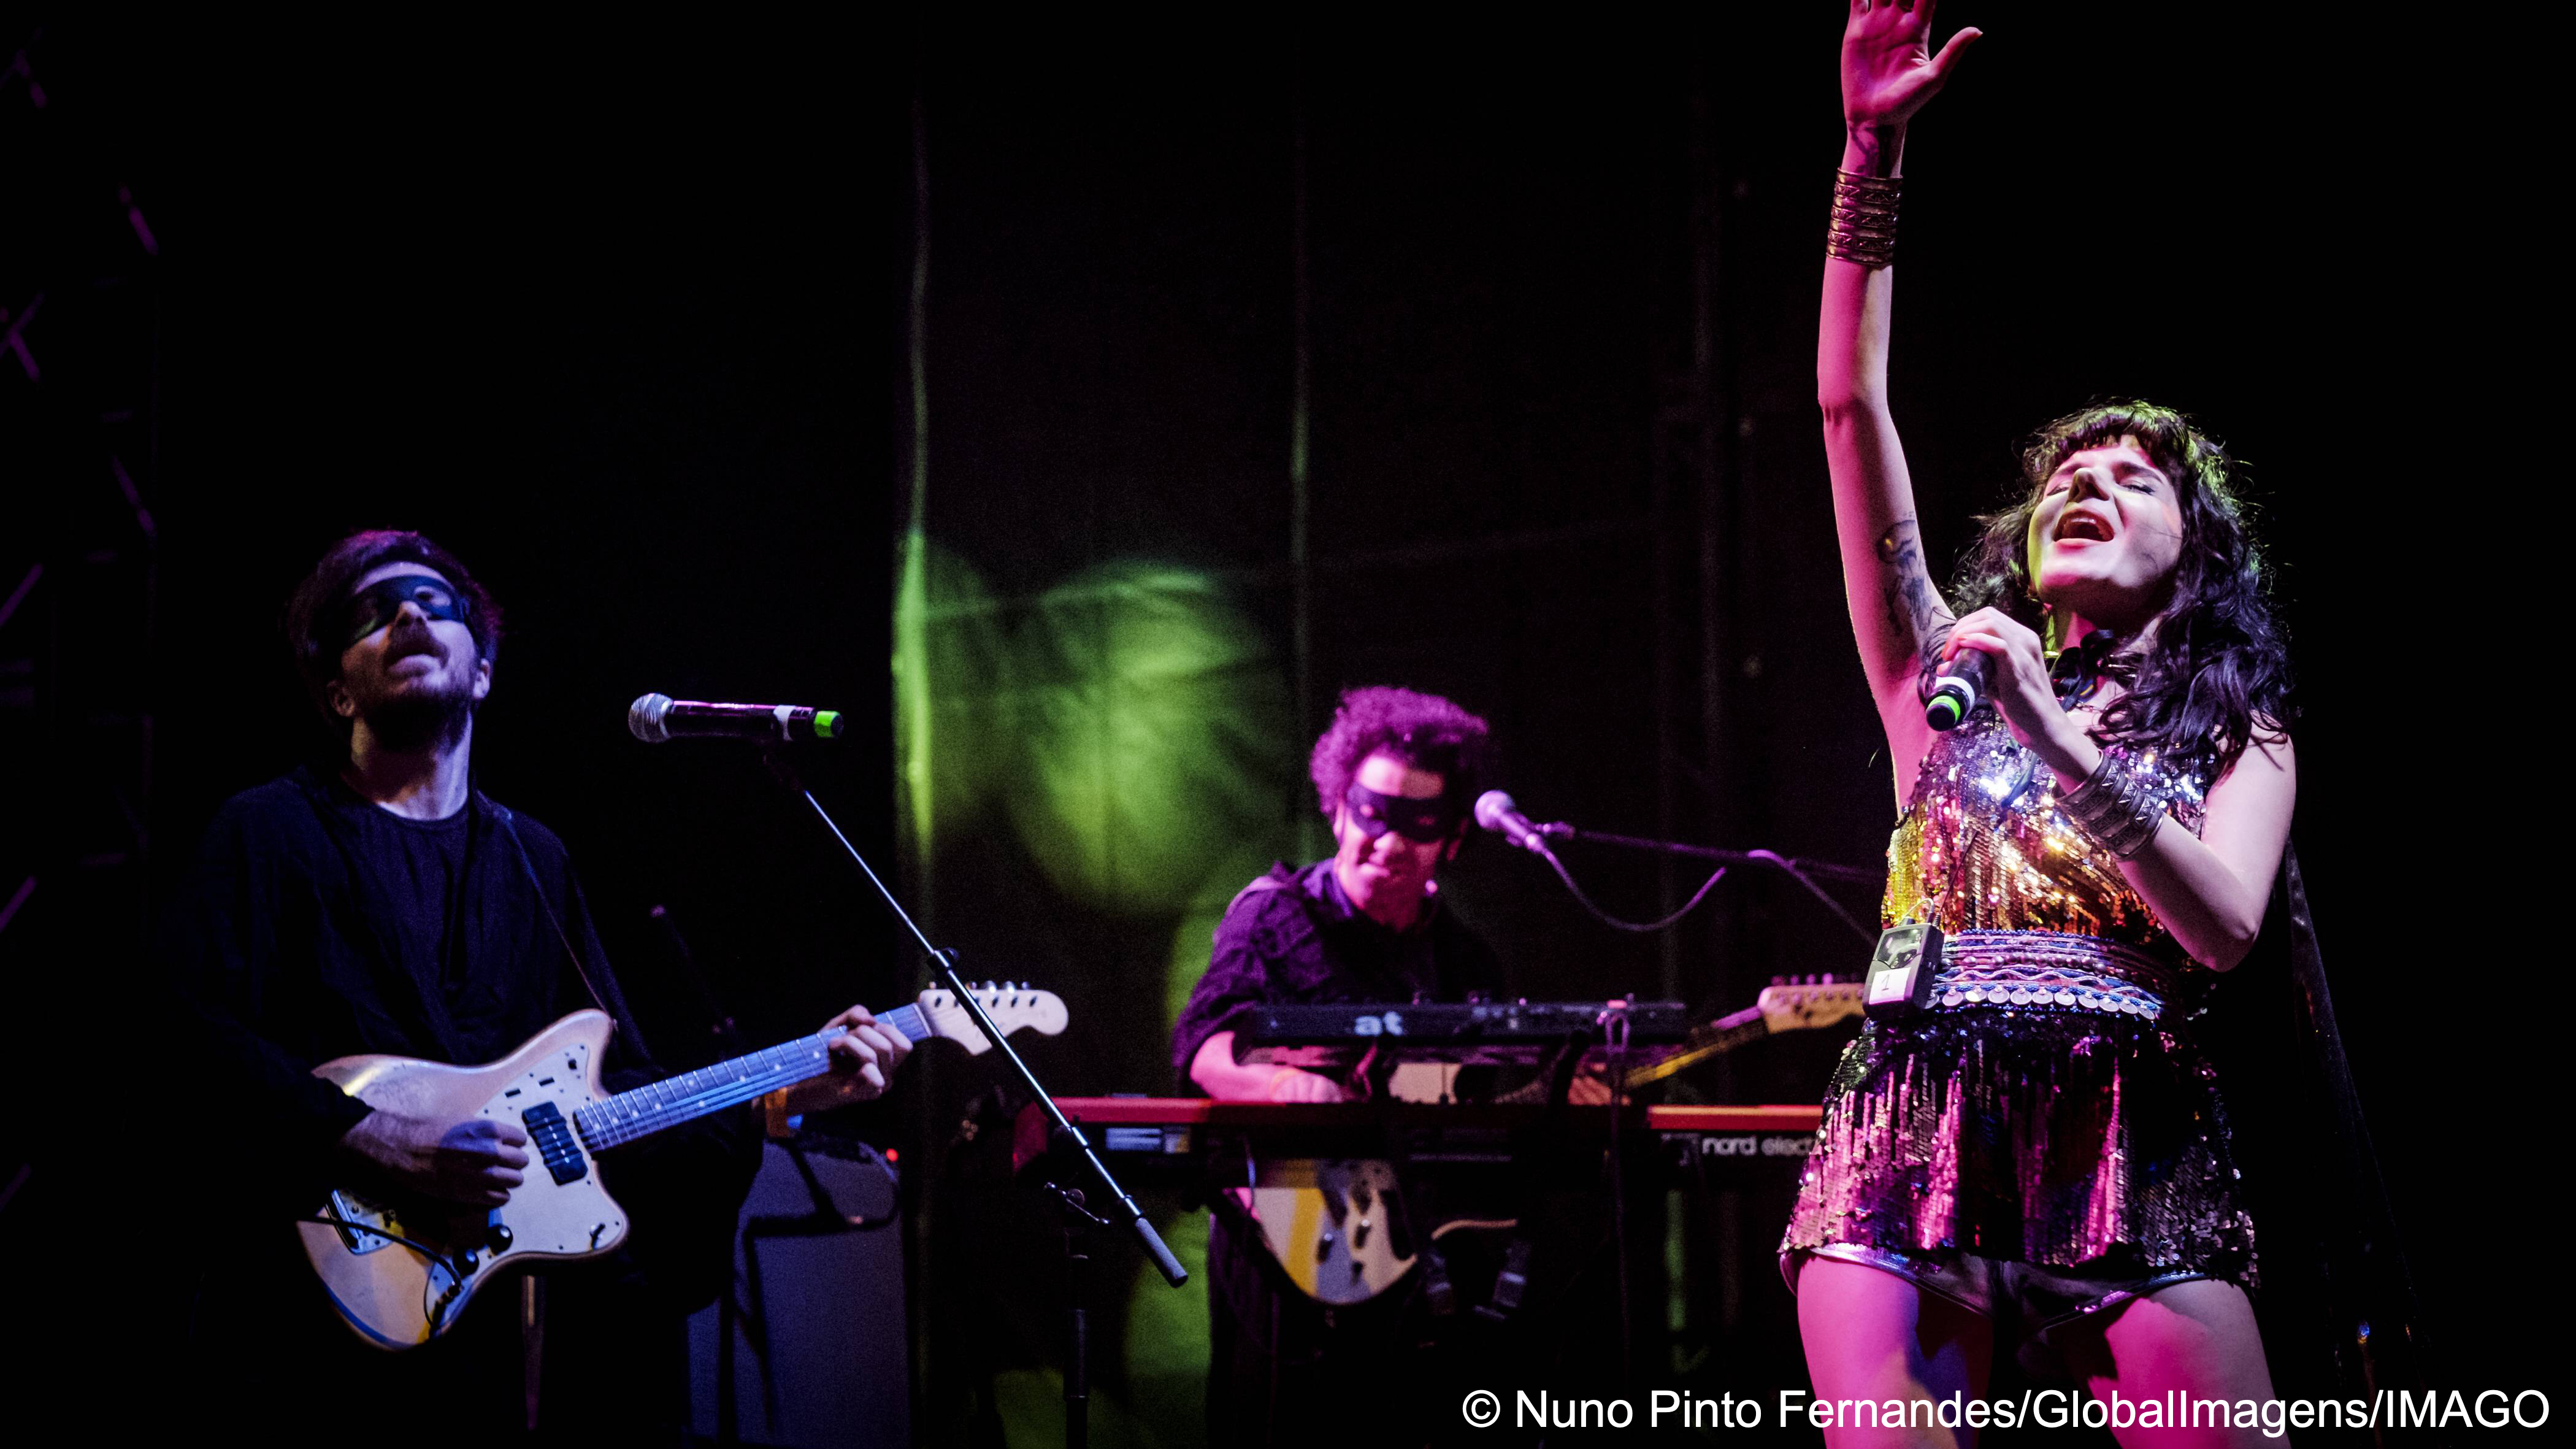 Gaye Su Akyol stretches her right arm into the air while singing on stage alongside two masked musicians (photo: Nuno Pinto Fernandes/GlobalImagens/IMAGO)